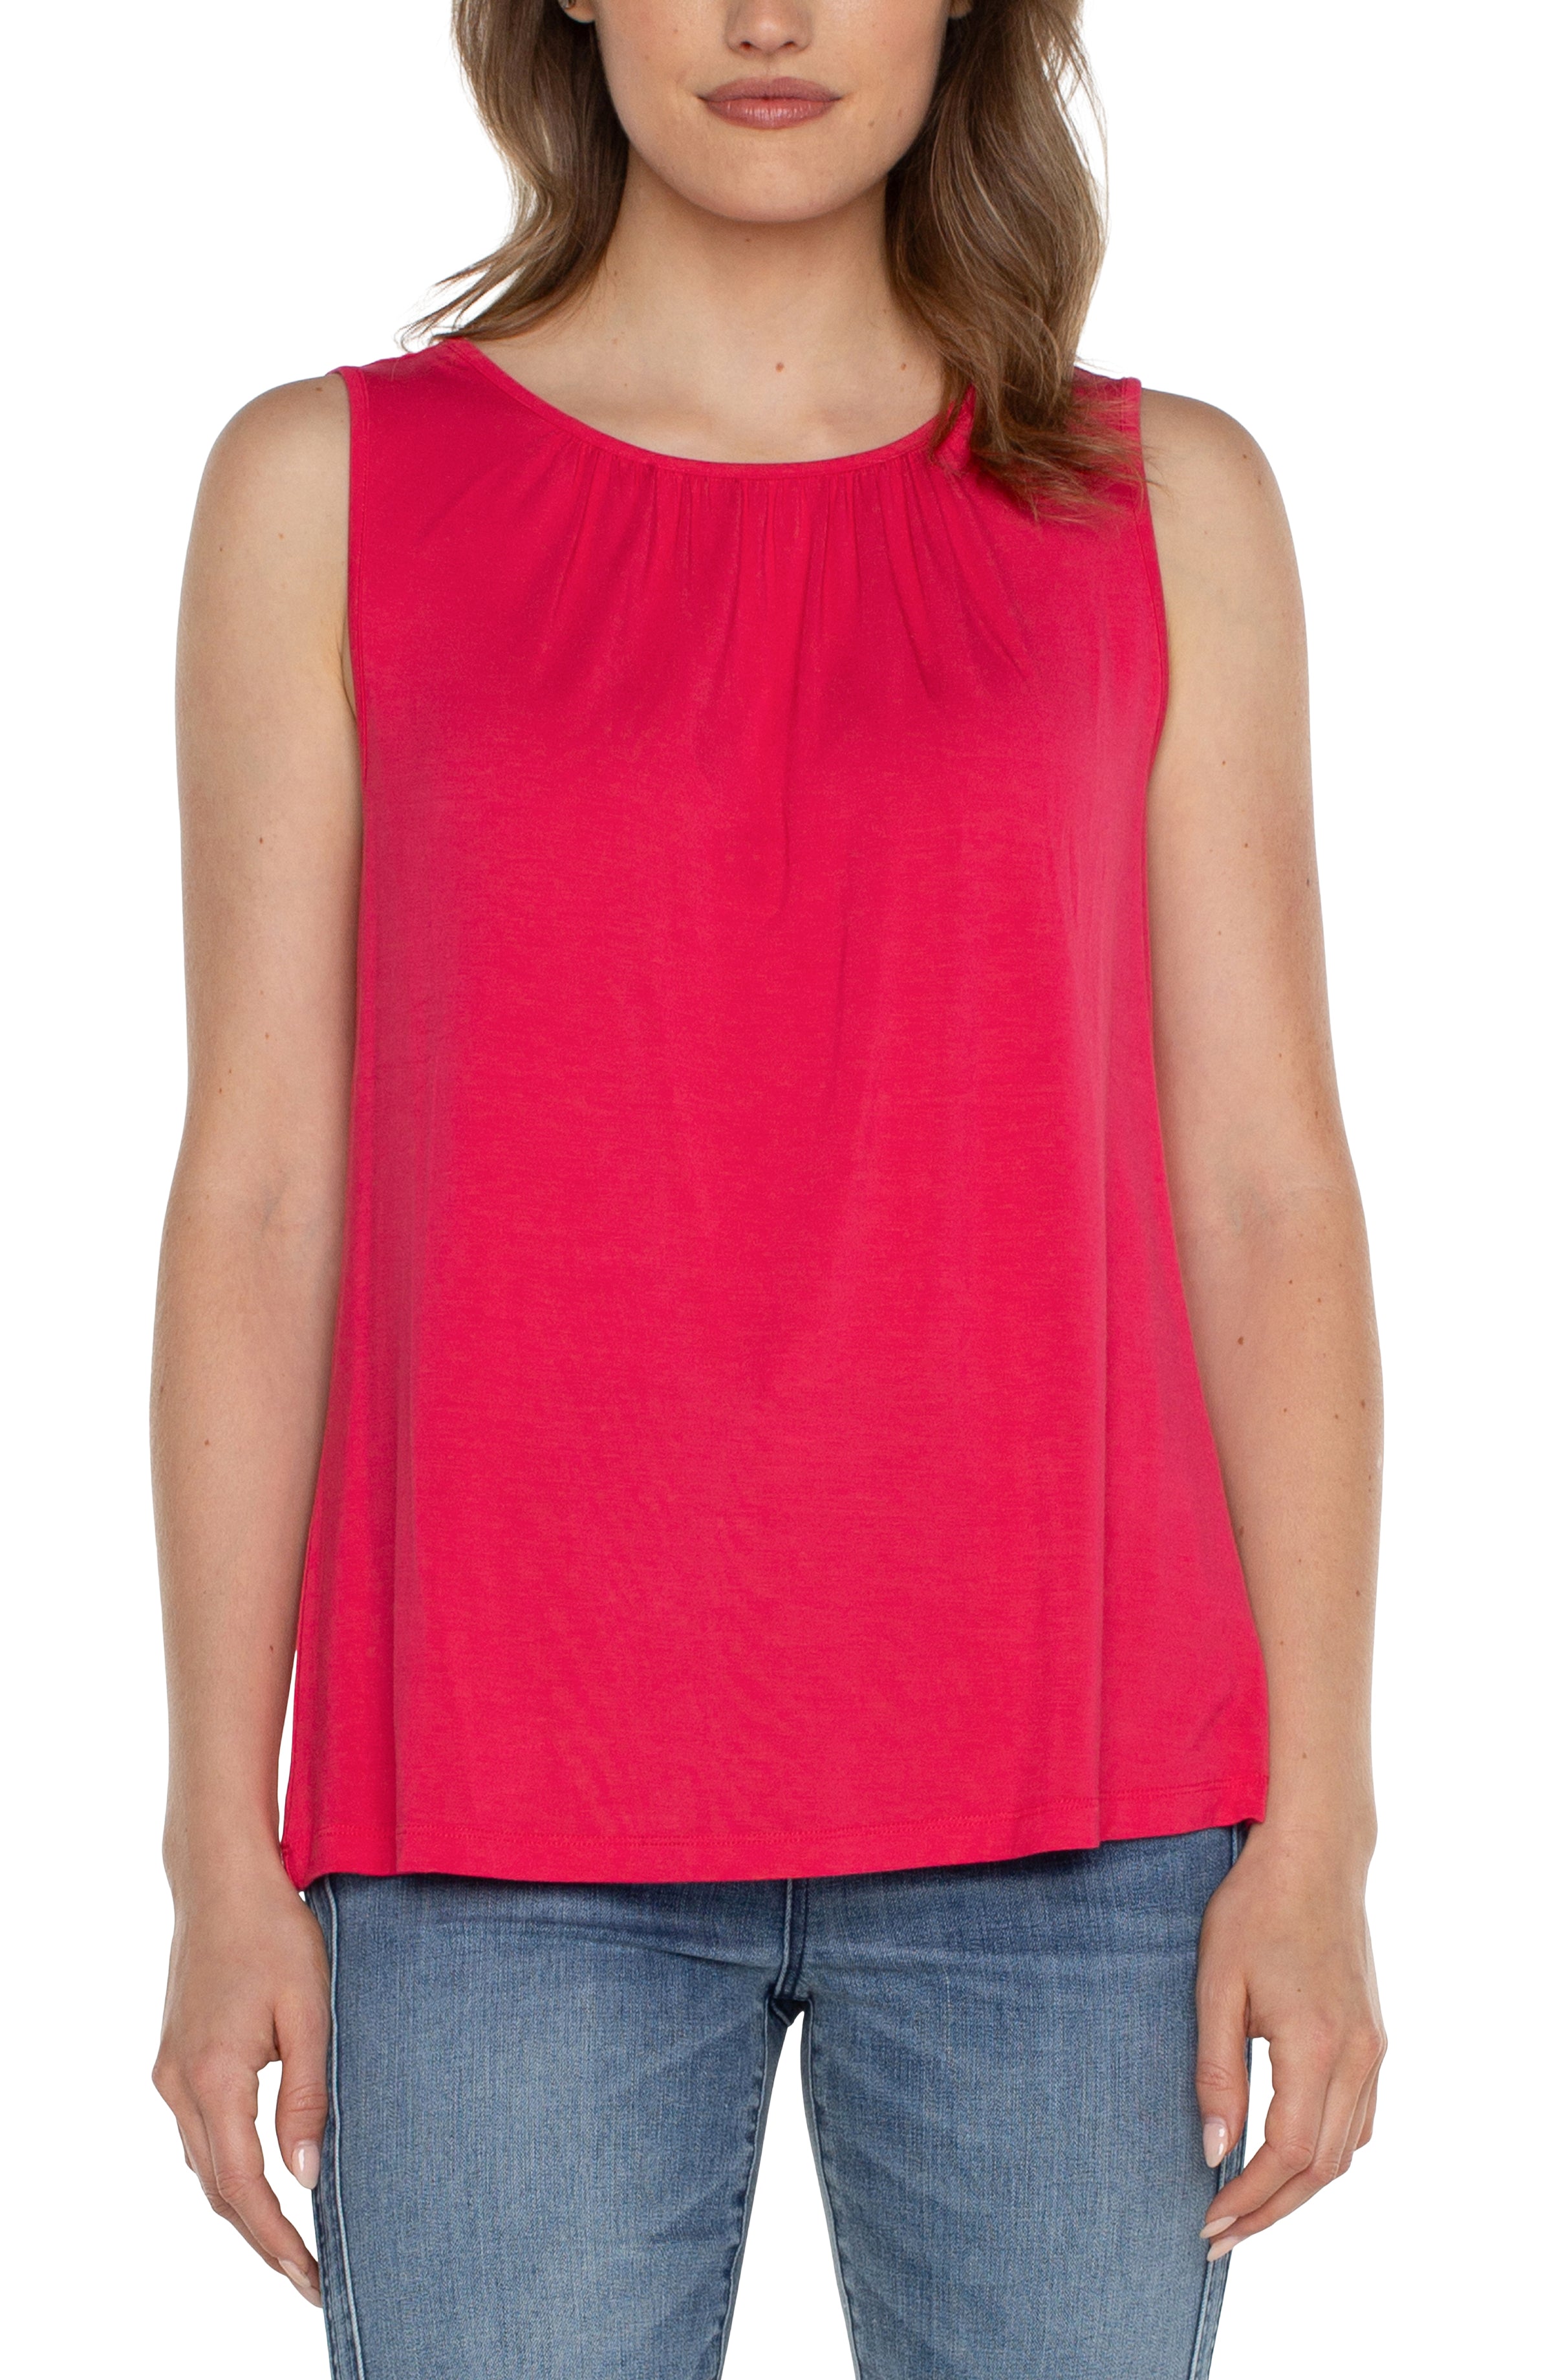 LVP Sleeveless Knit Top - Pink Punch Front View